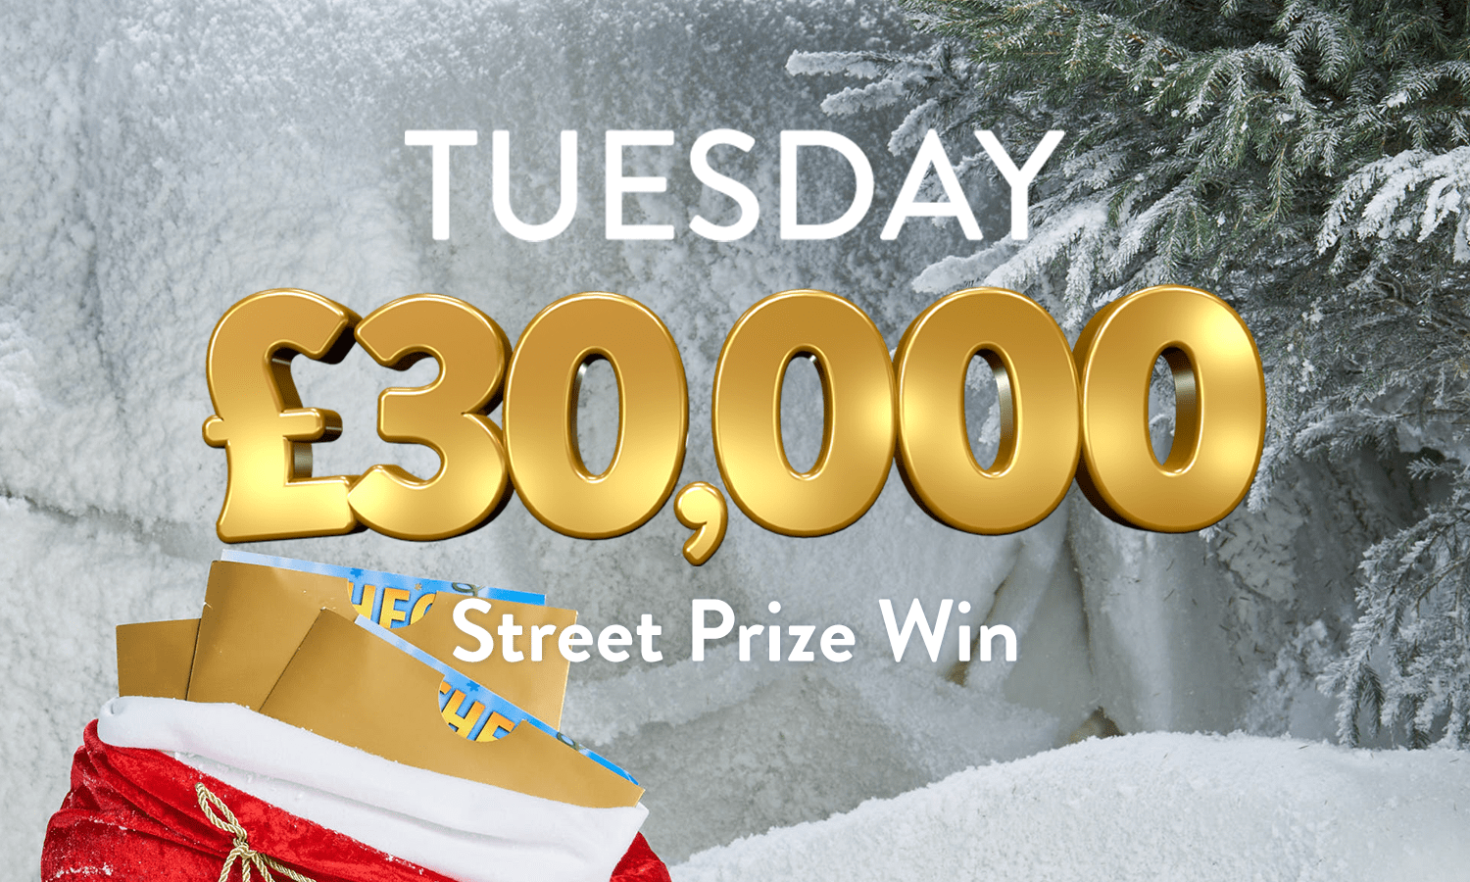 Every ticket in a lucky postcode wins £30,000 in today's Street Prize